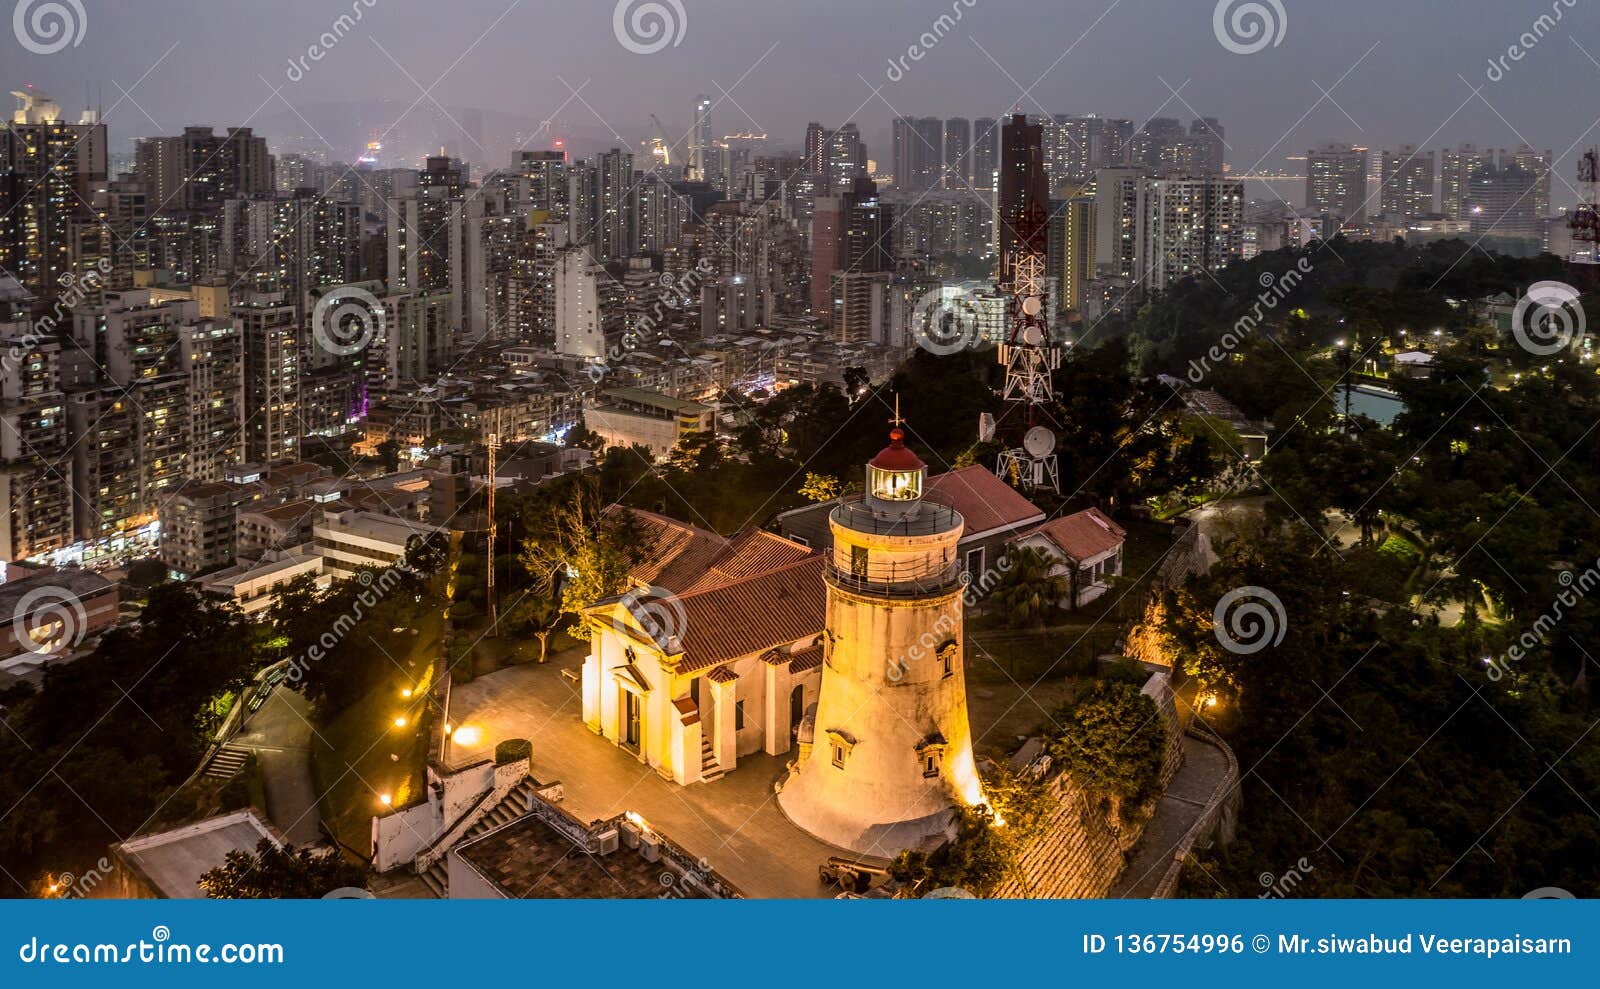 guia lighthouse, fortress and chapel, aerial view at night, macau